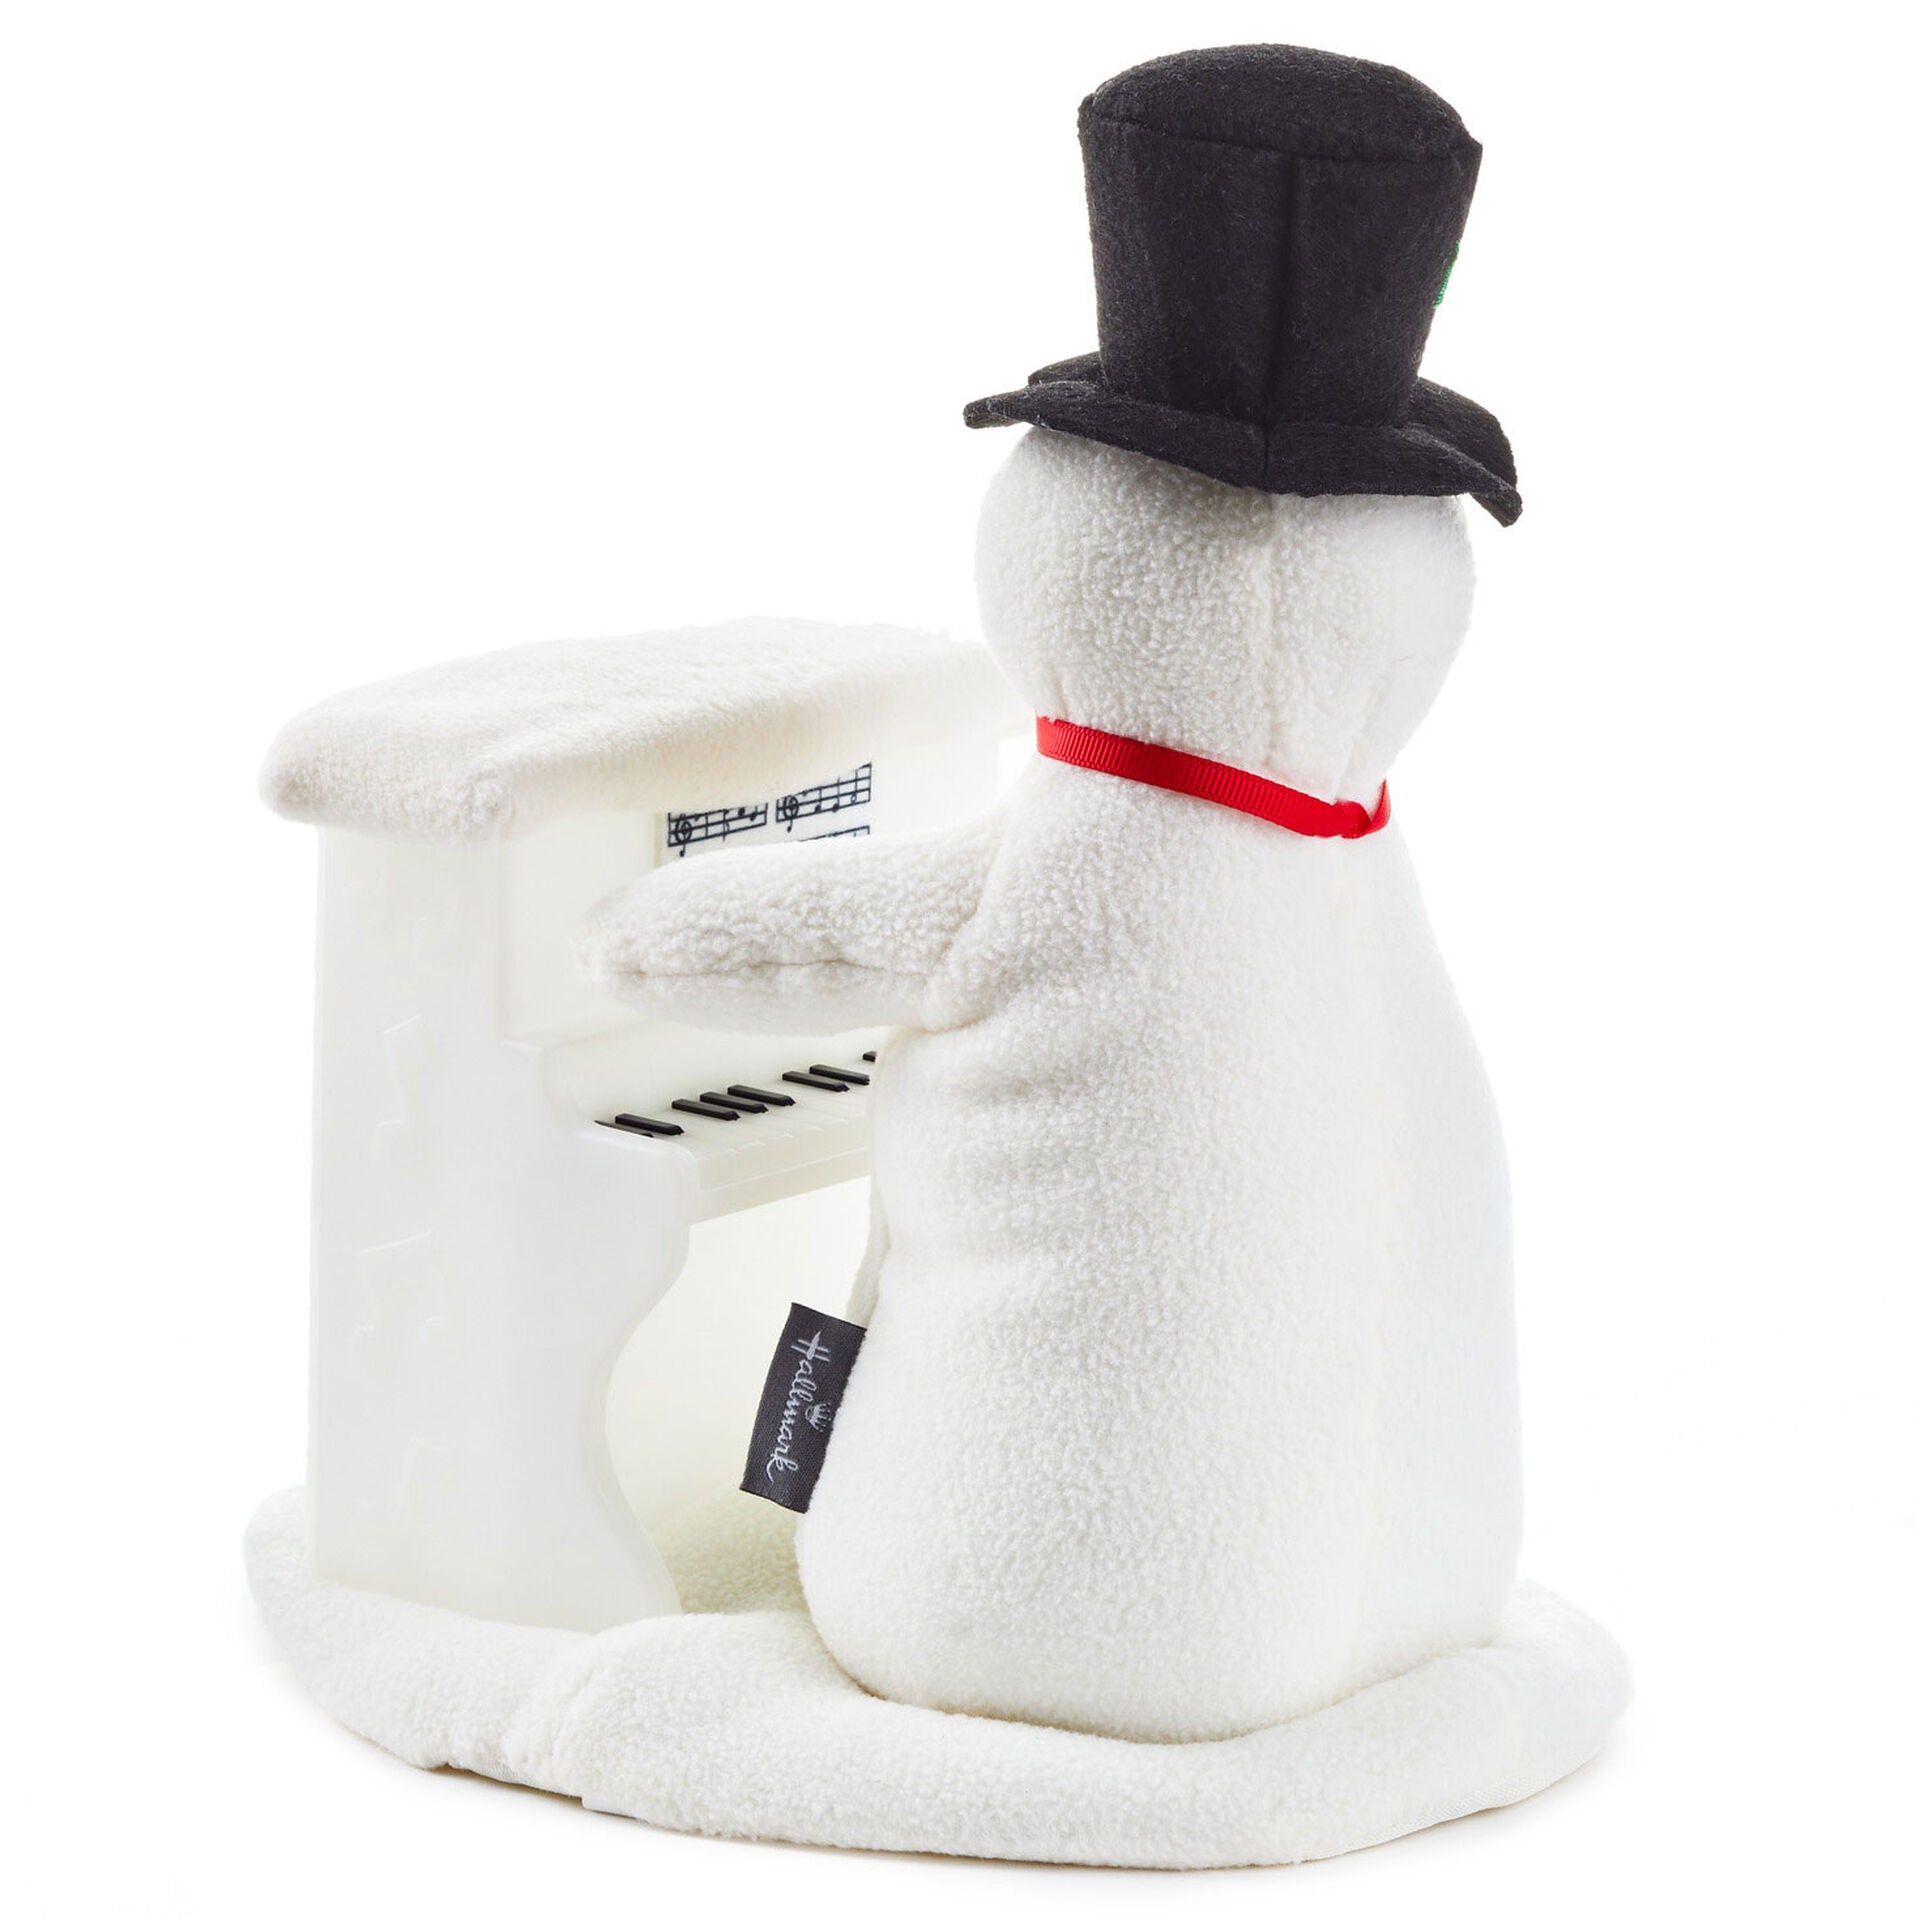 20th Anniversary Sing-Along Showman Snowman Plush With Sound, Light and Motion